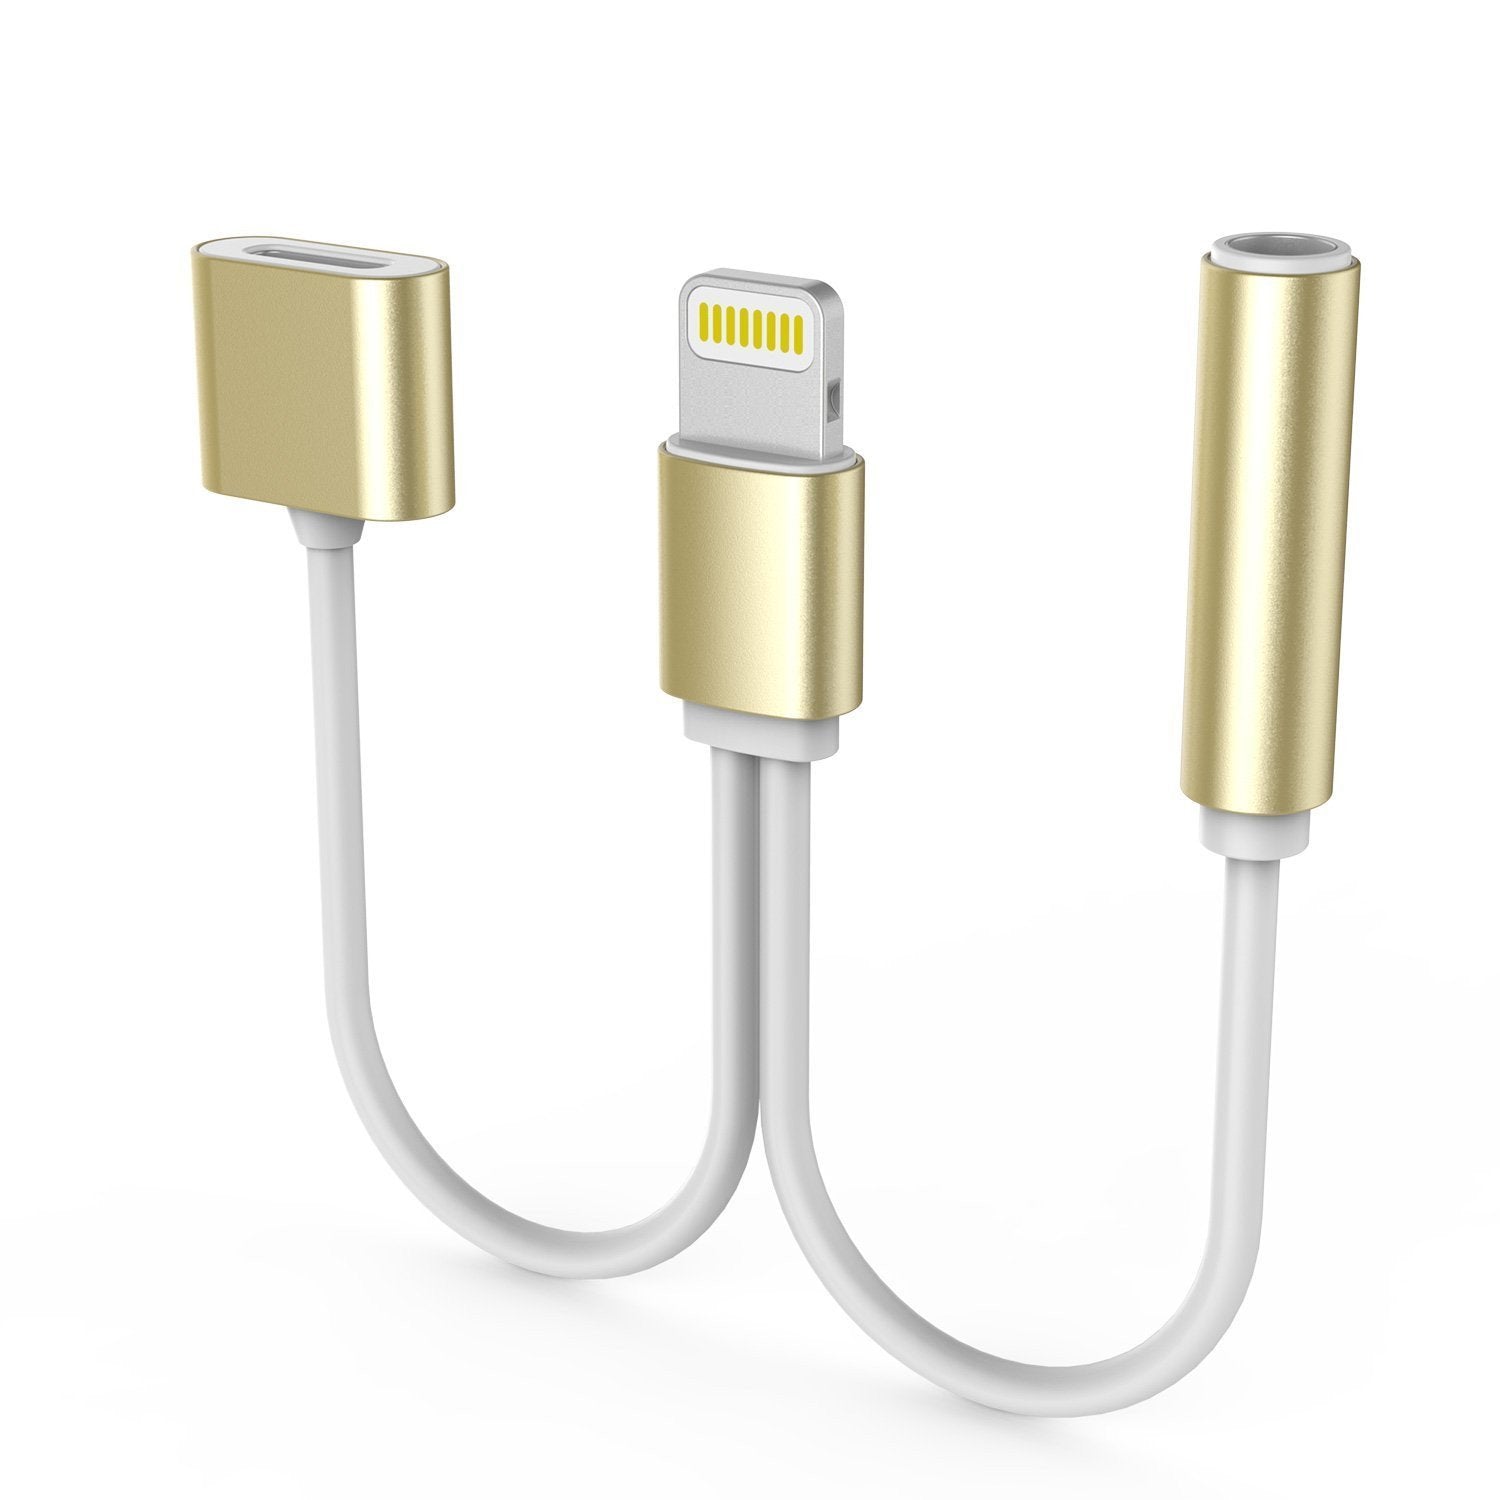 PUNKZAP Lightning Adapter Cable 2 in 1 Splitter Charger [GOLD]